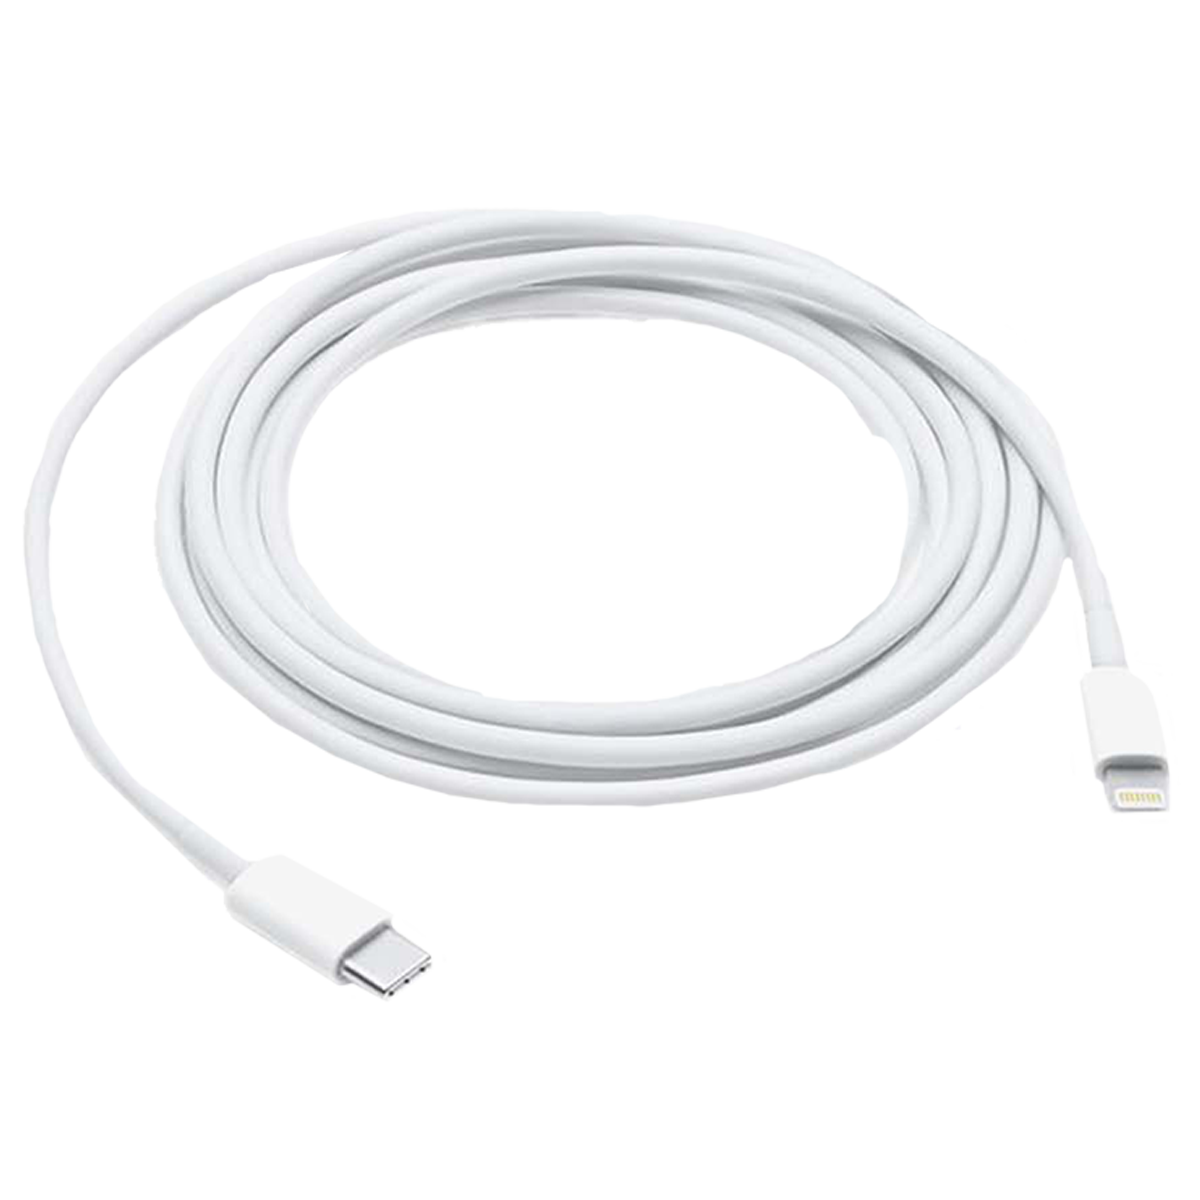 Apple 1 Meter USB 3.1 (Type-C) to Lightning Power/Charging USB Cable (For iPhones/iPads/iPods, MX0K2ZM/A, White)_1